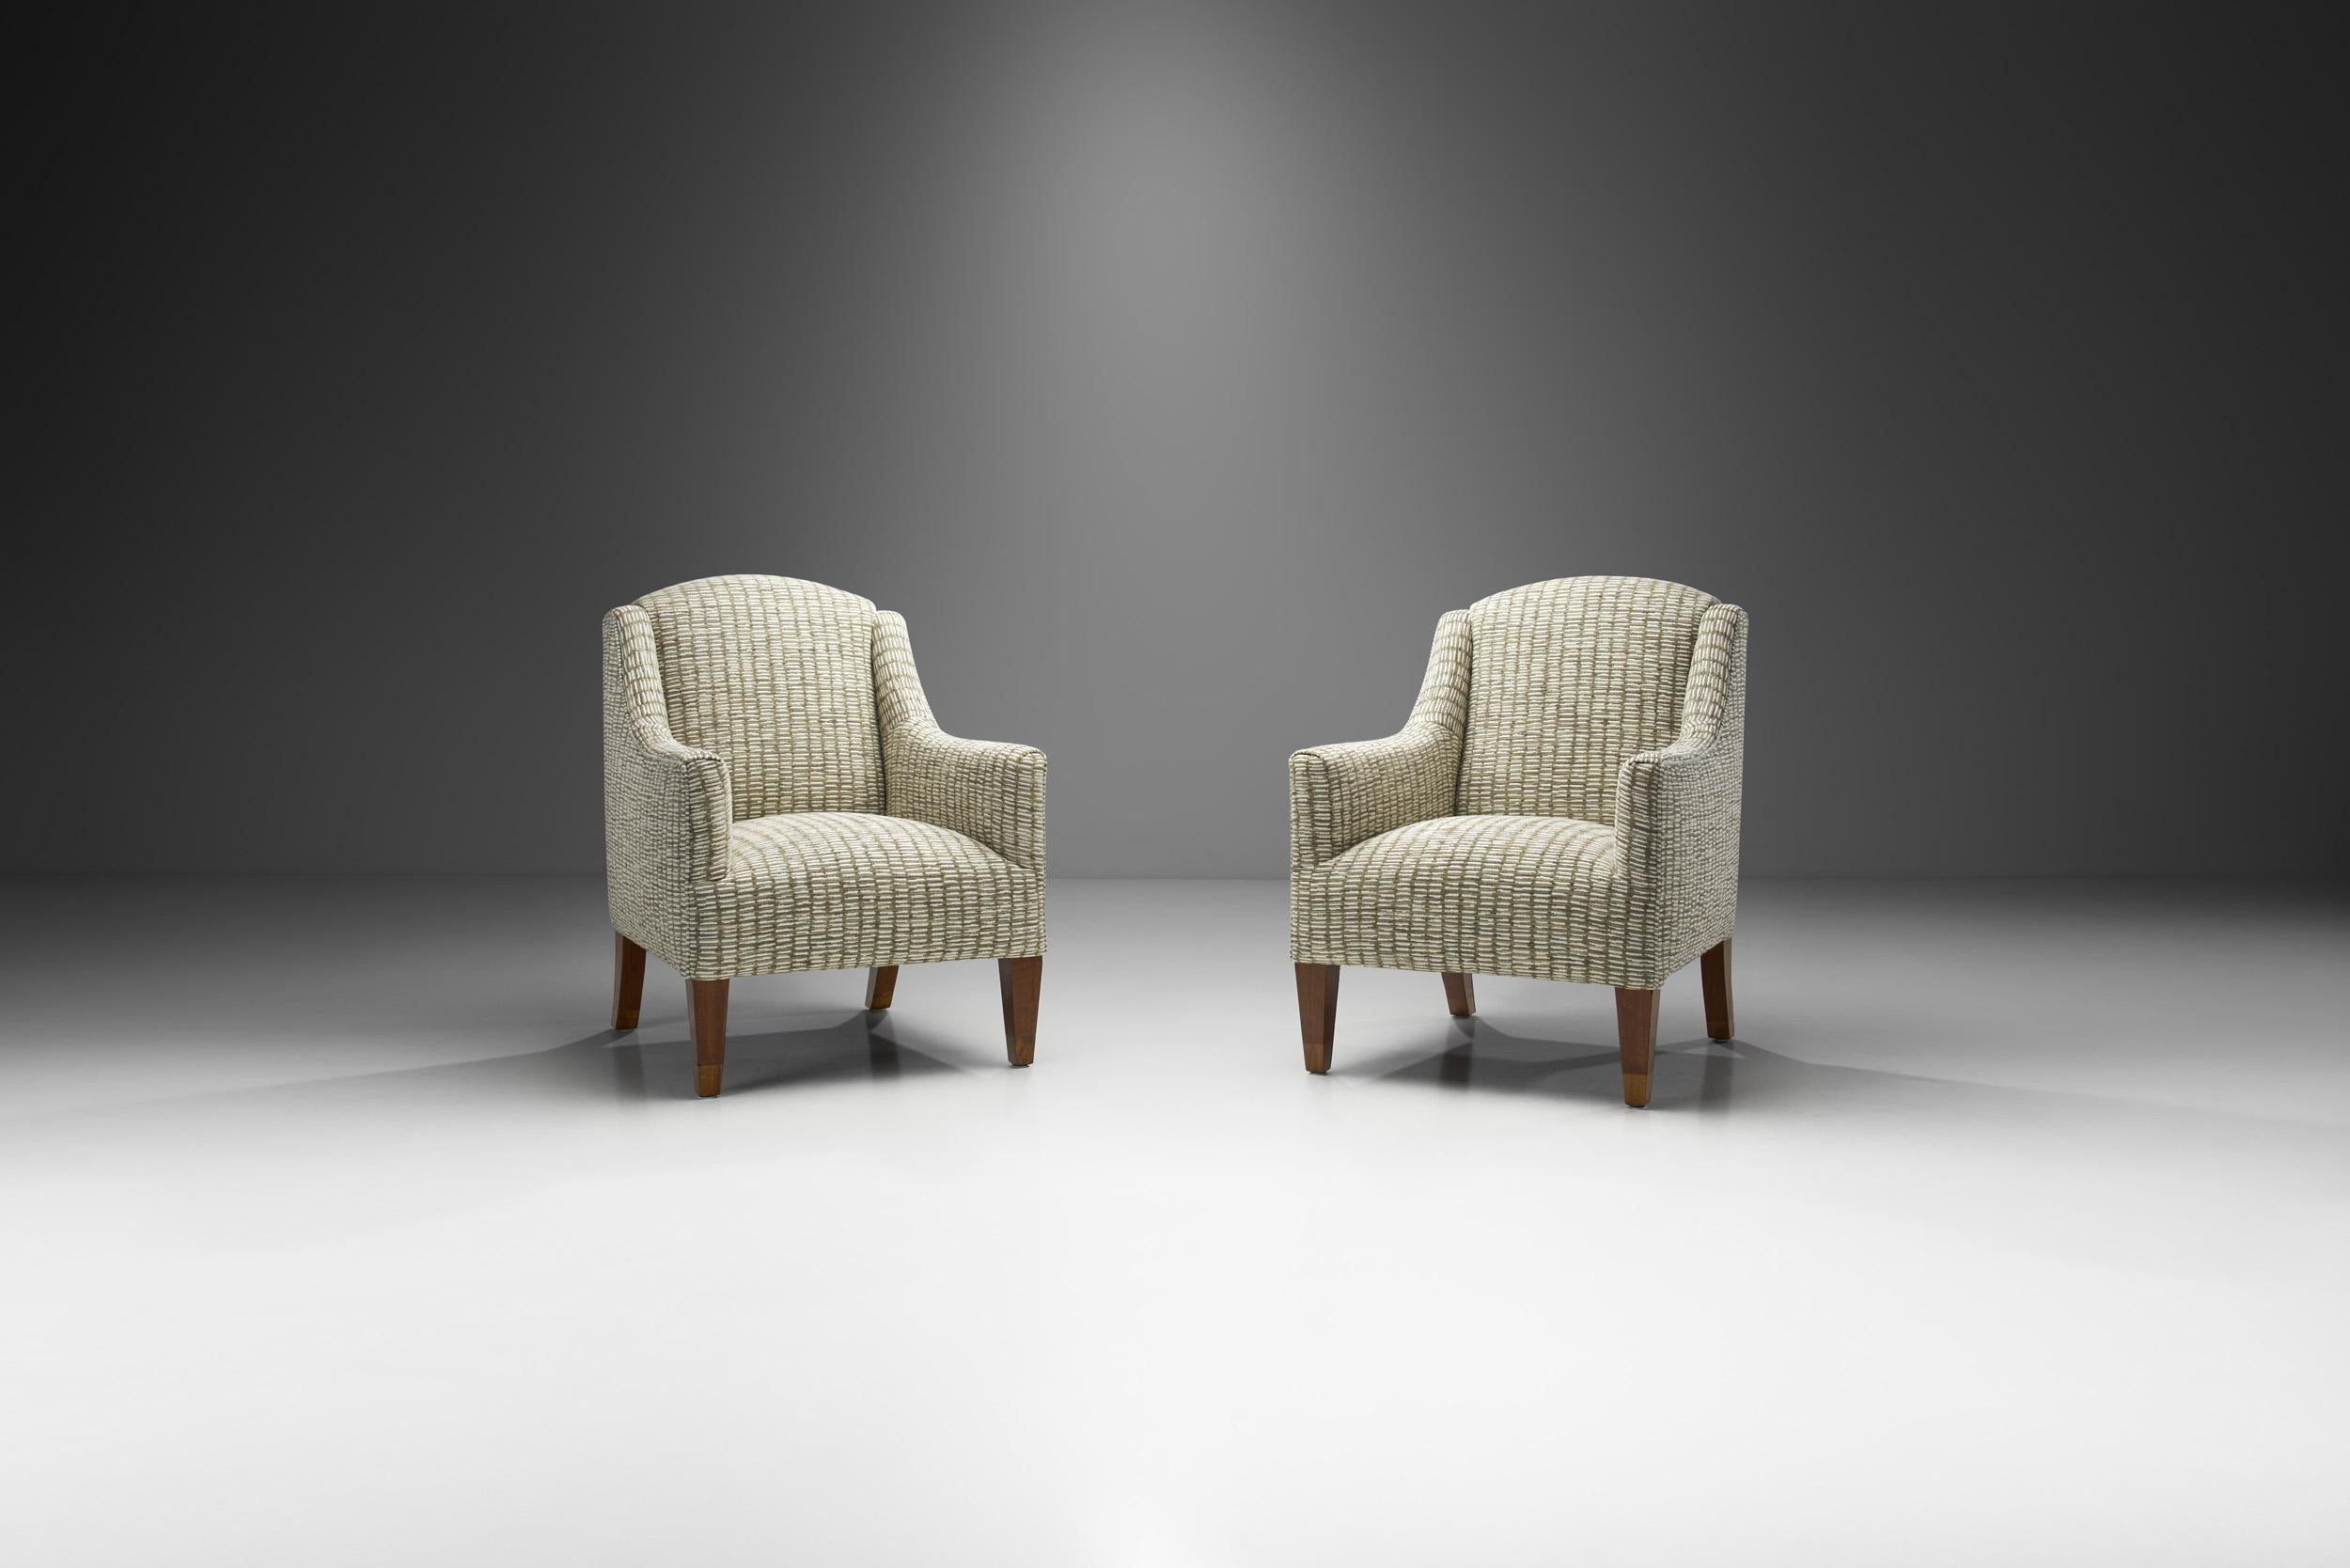 This pair of Danish-made easy chairs is characterized by the best qualities of Danish mid-century design. From the restrained aesthetic to the elegant pairing of materials, these chairs are the perfect example of how pairing Danish design, the work